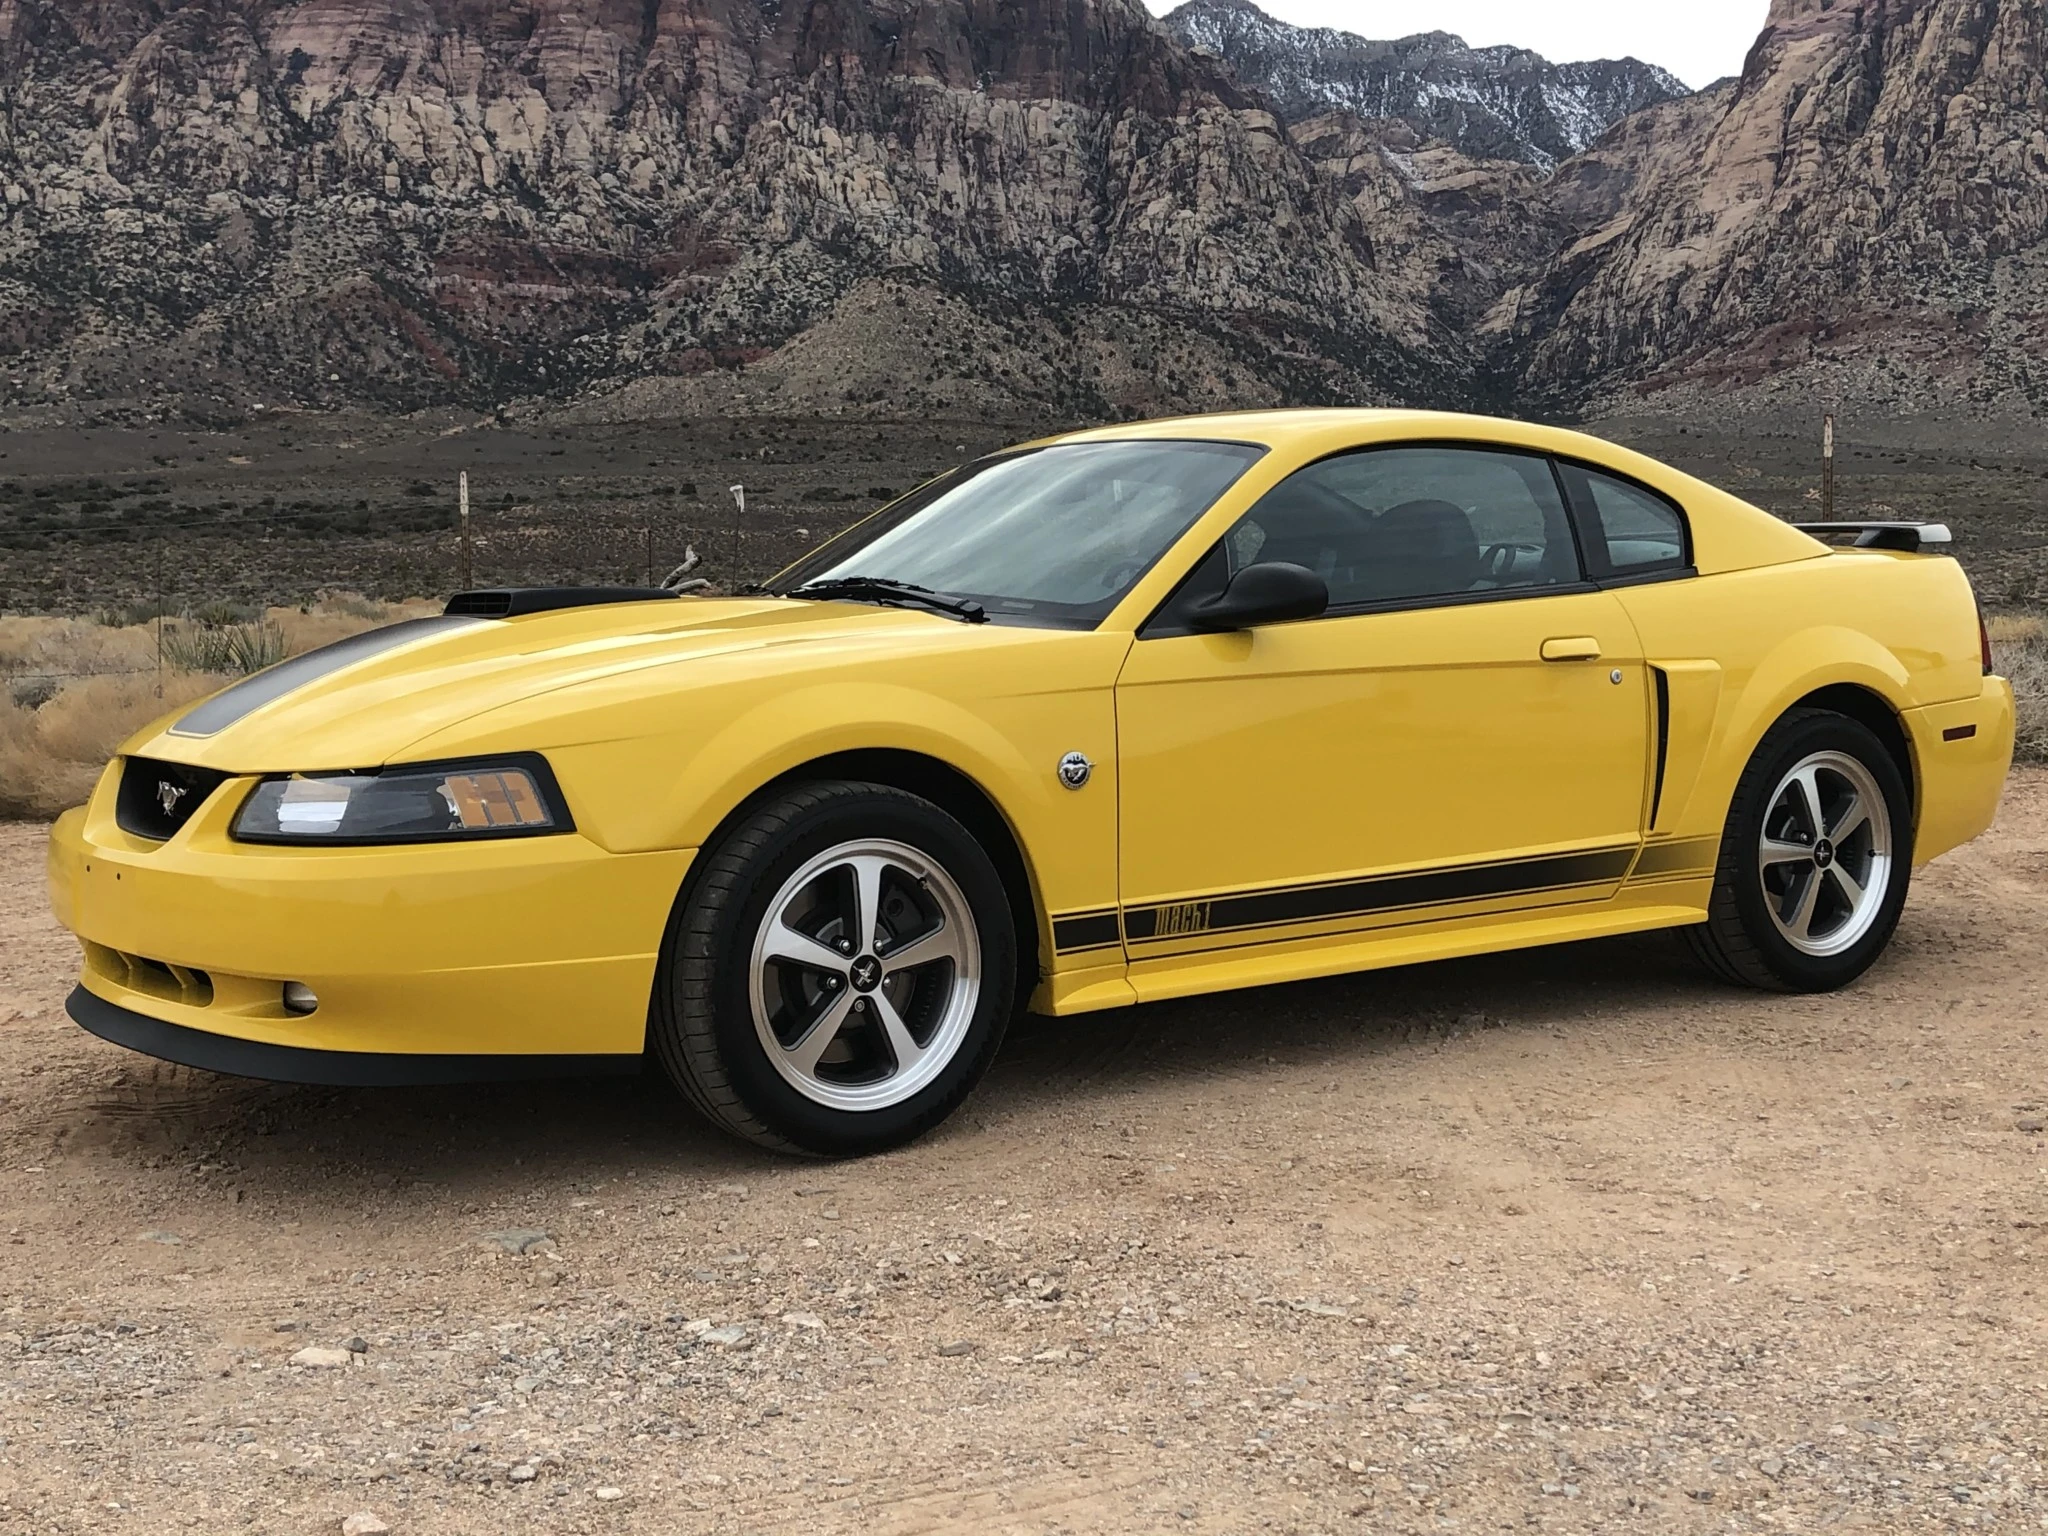 Mustang Of The Day: 2004 Ford Mustang Mach 1